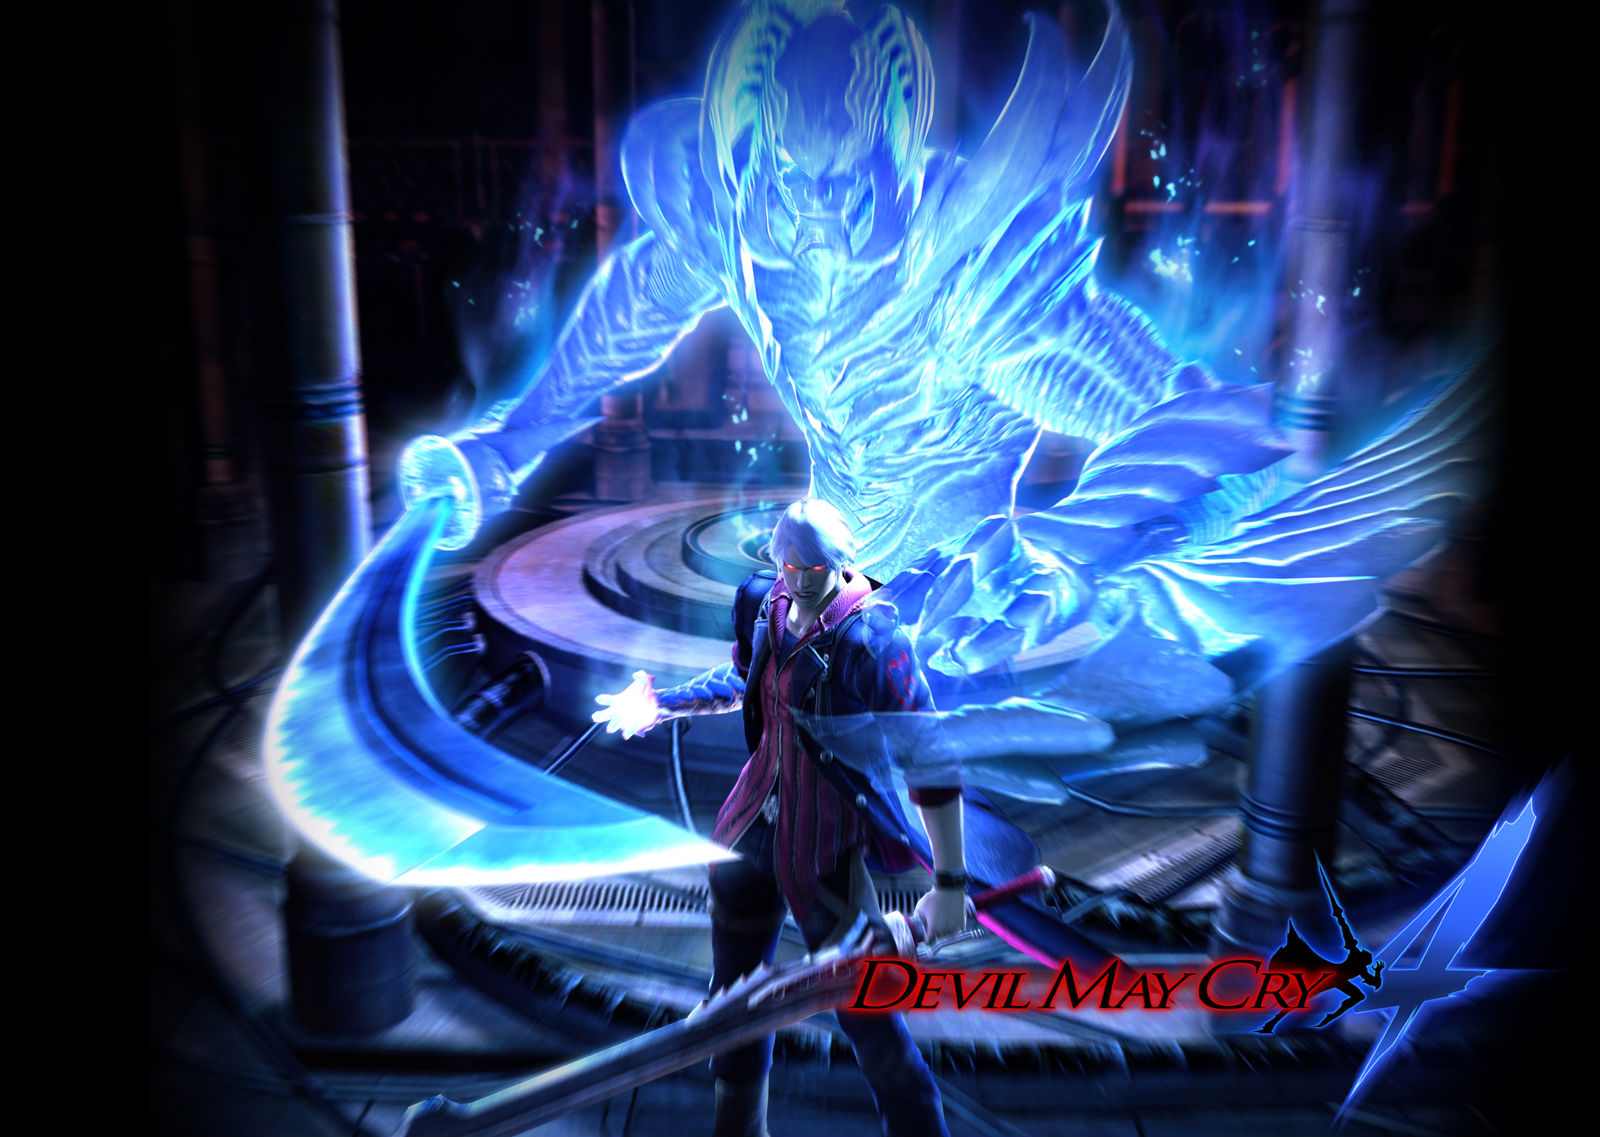 devil may cry, devil may cry 4, video game